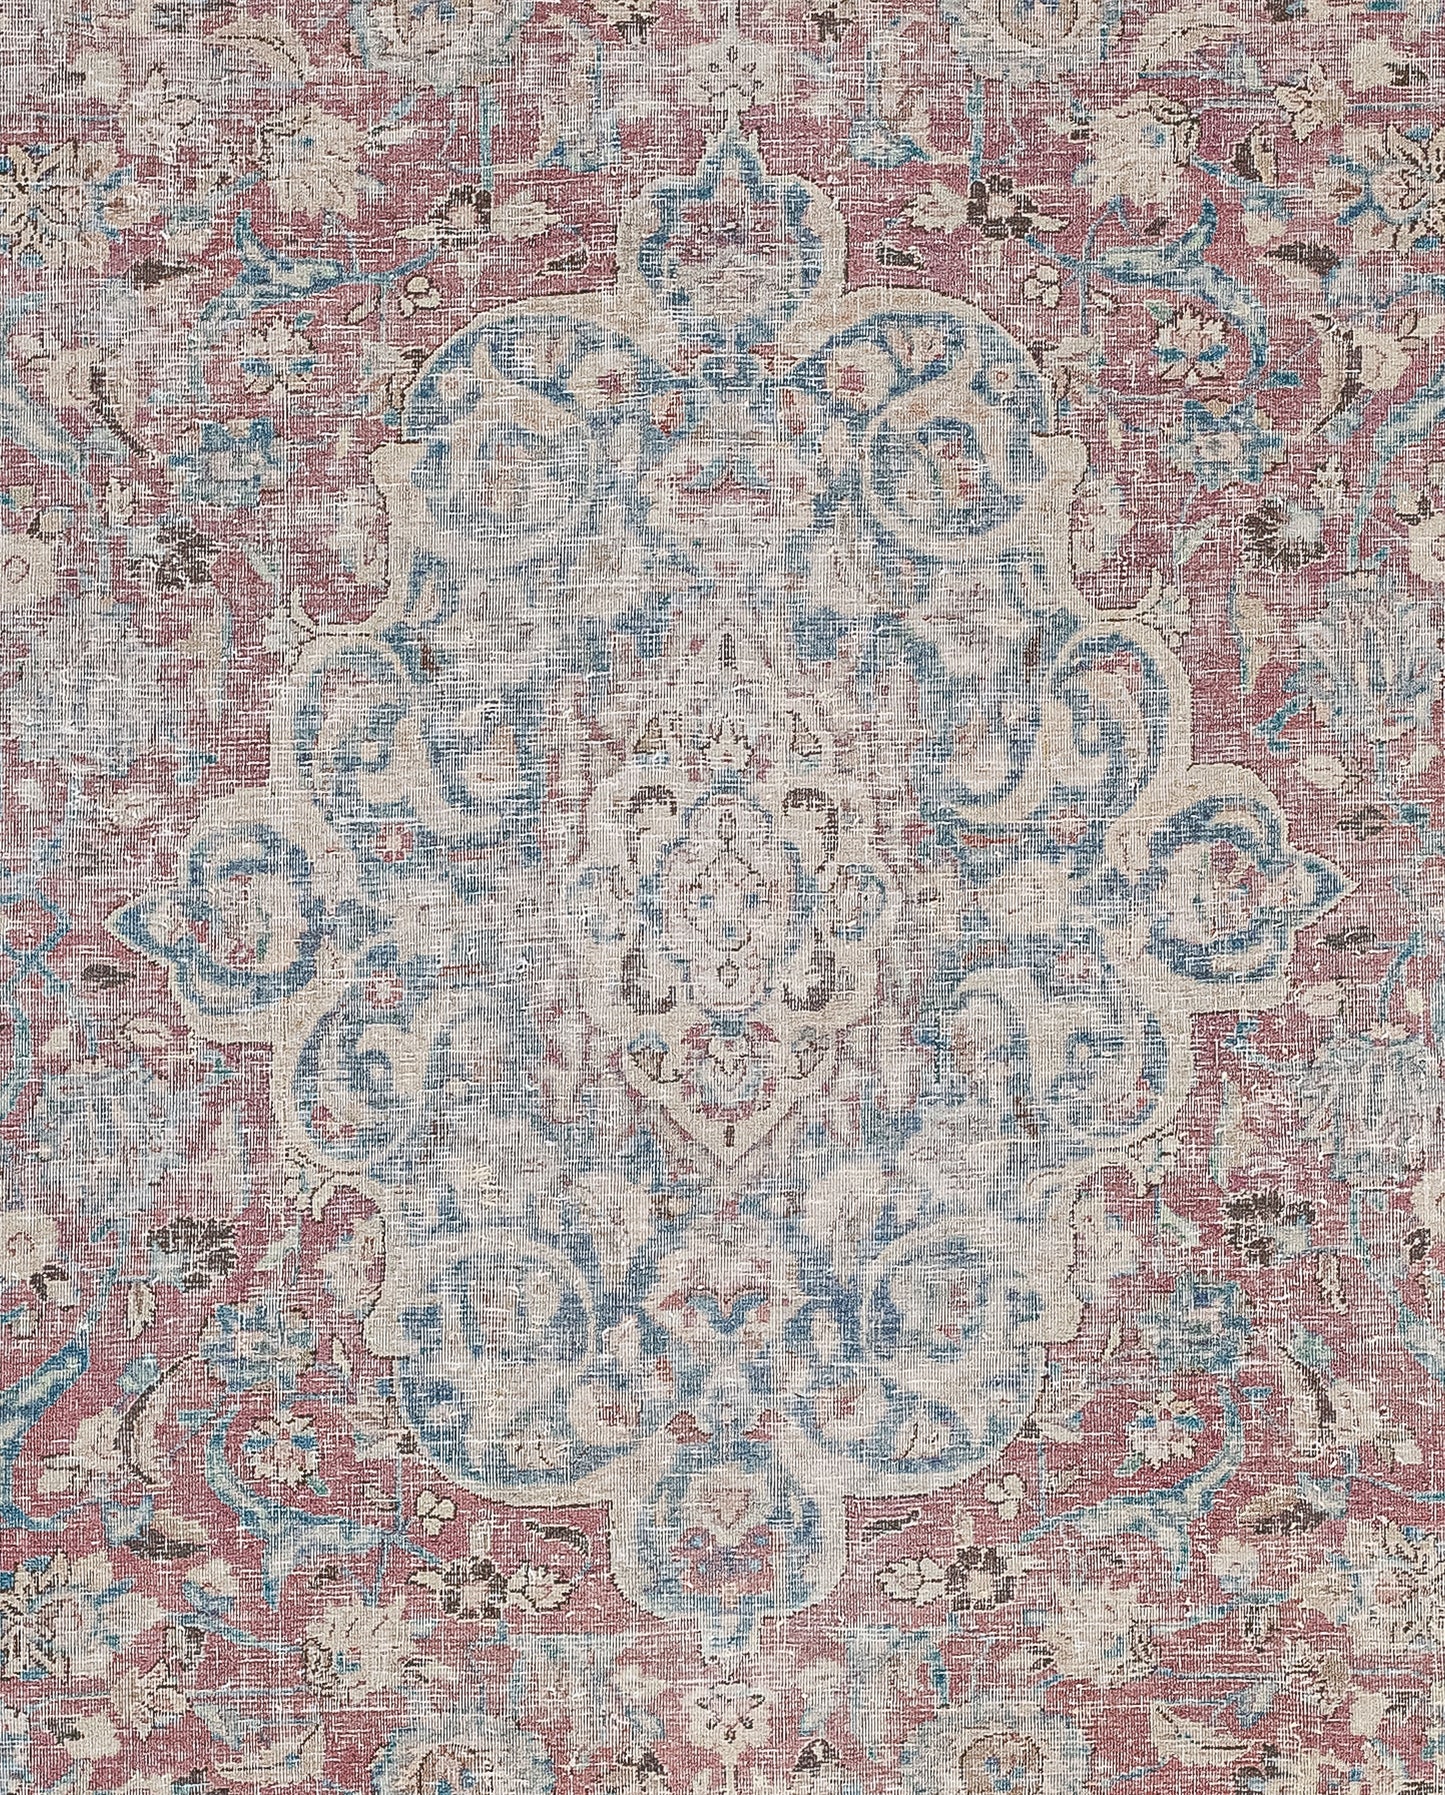 The entire rug comes with a symmetrical flower motifs pattern. The close-up of the rug shows a beige ornament filled with blue on a burgundy background.